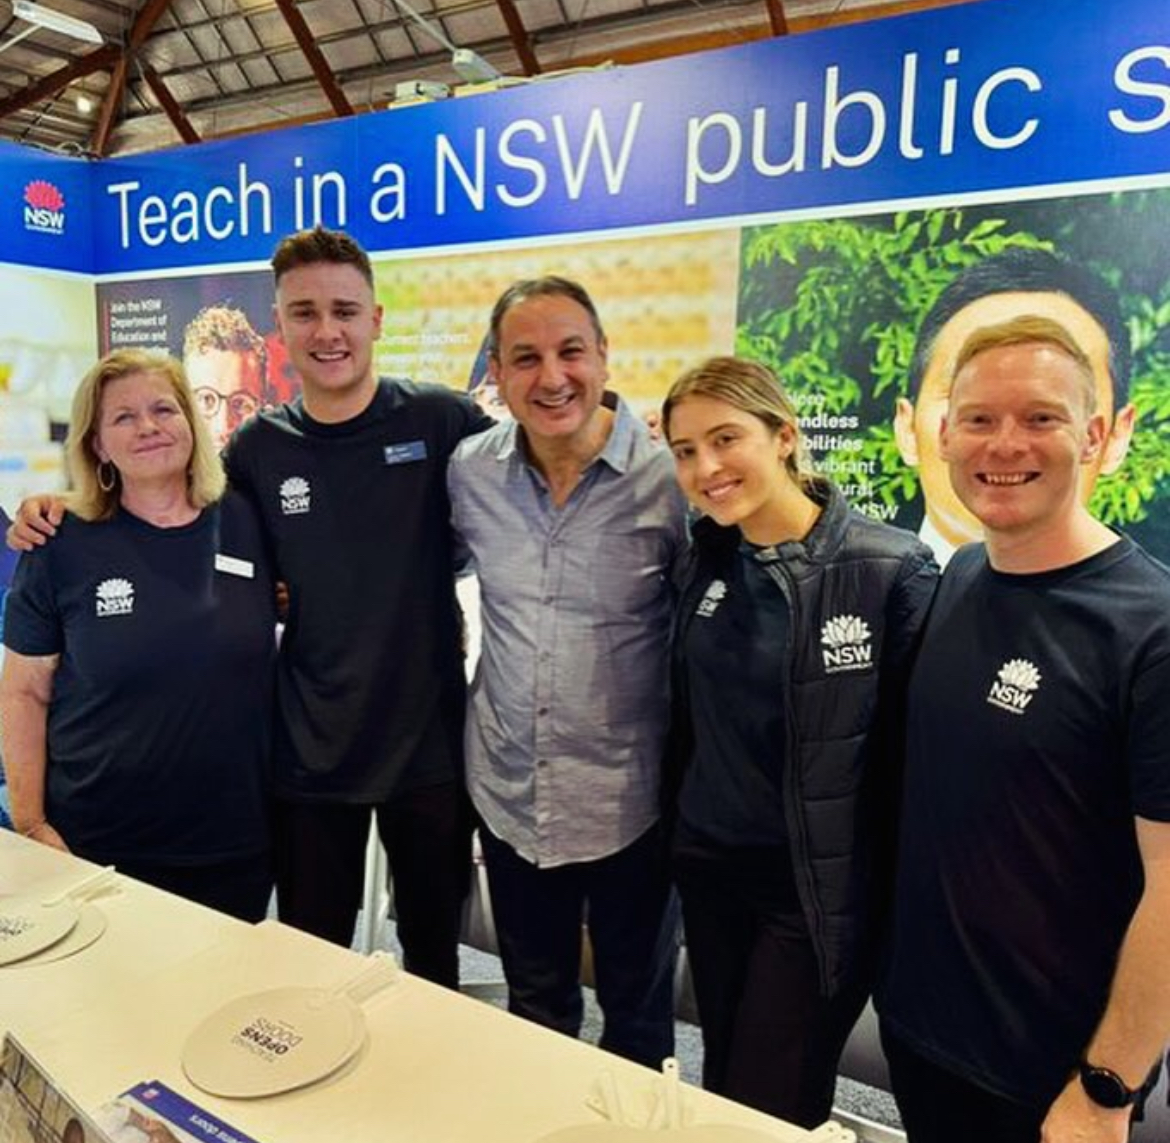 Congratulations team! @NSWEducation is truly the best place to work. Nice one @dizdarm, @AaronJohnston5 and friends. If you get a chance, head to the @eastershow. I'm free if you need coffee dropped over  :)